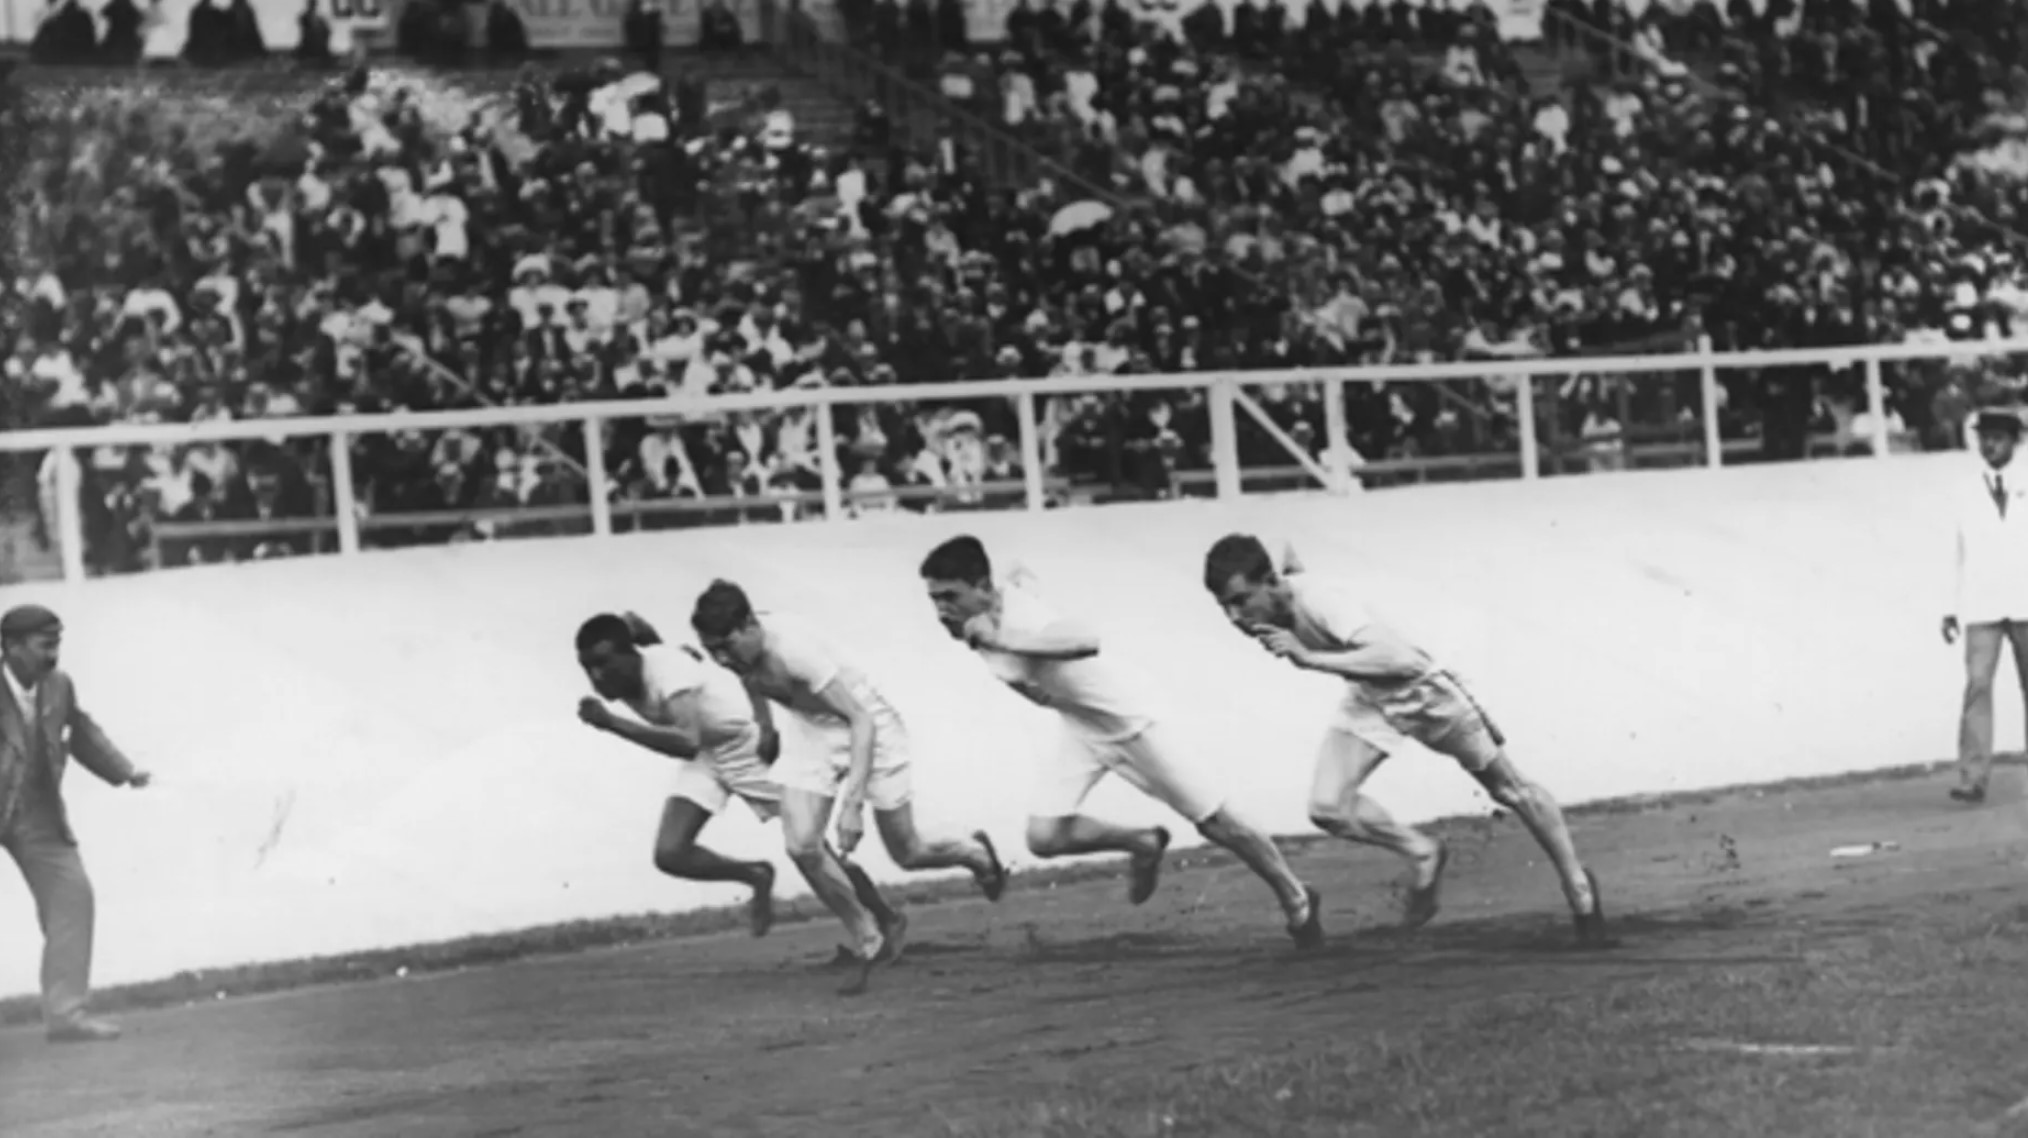 John Baxter Taylor, left, runs in a race during the 1908 Olympics.